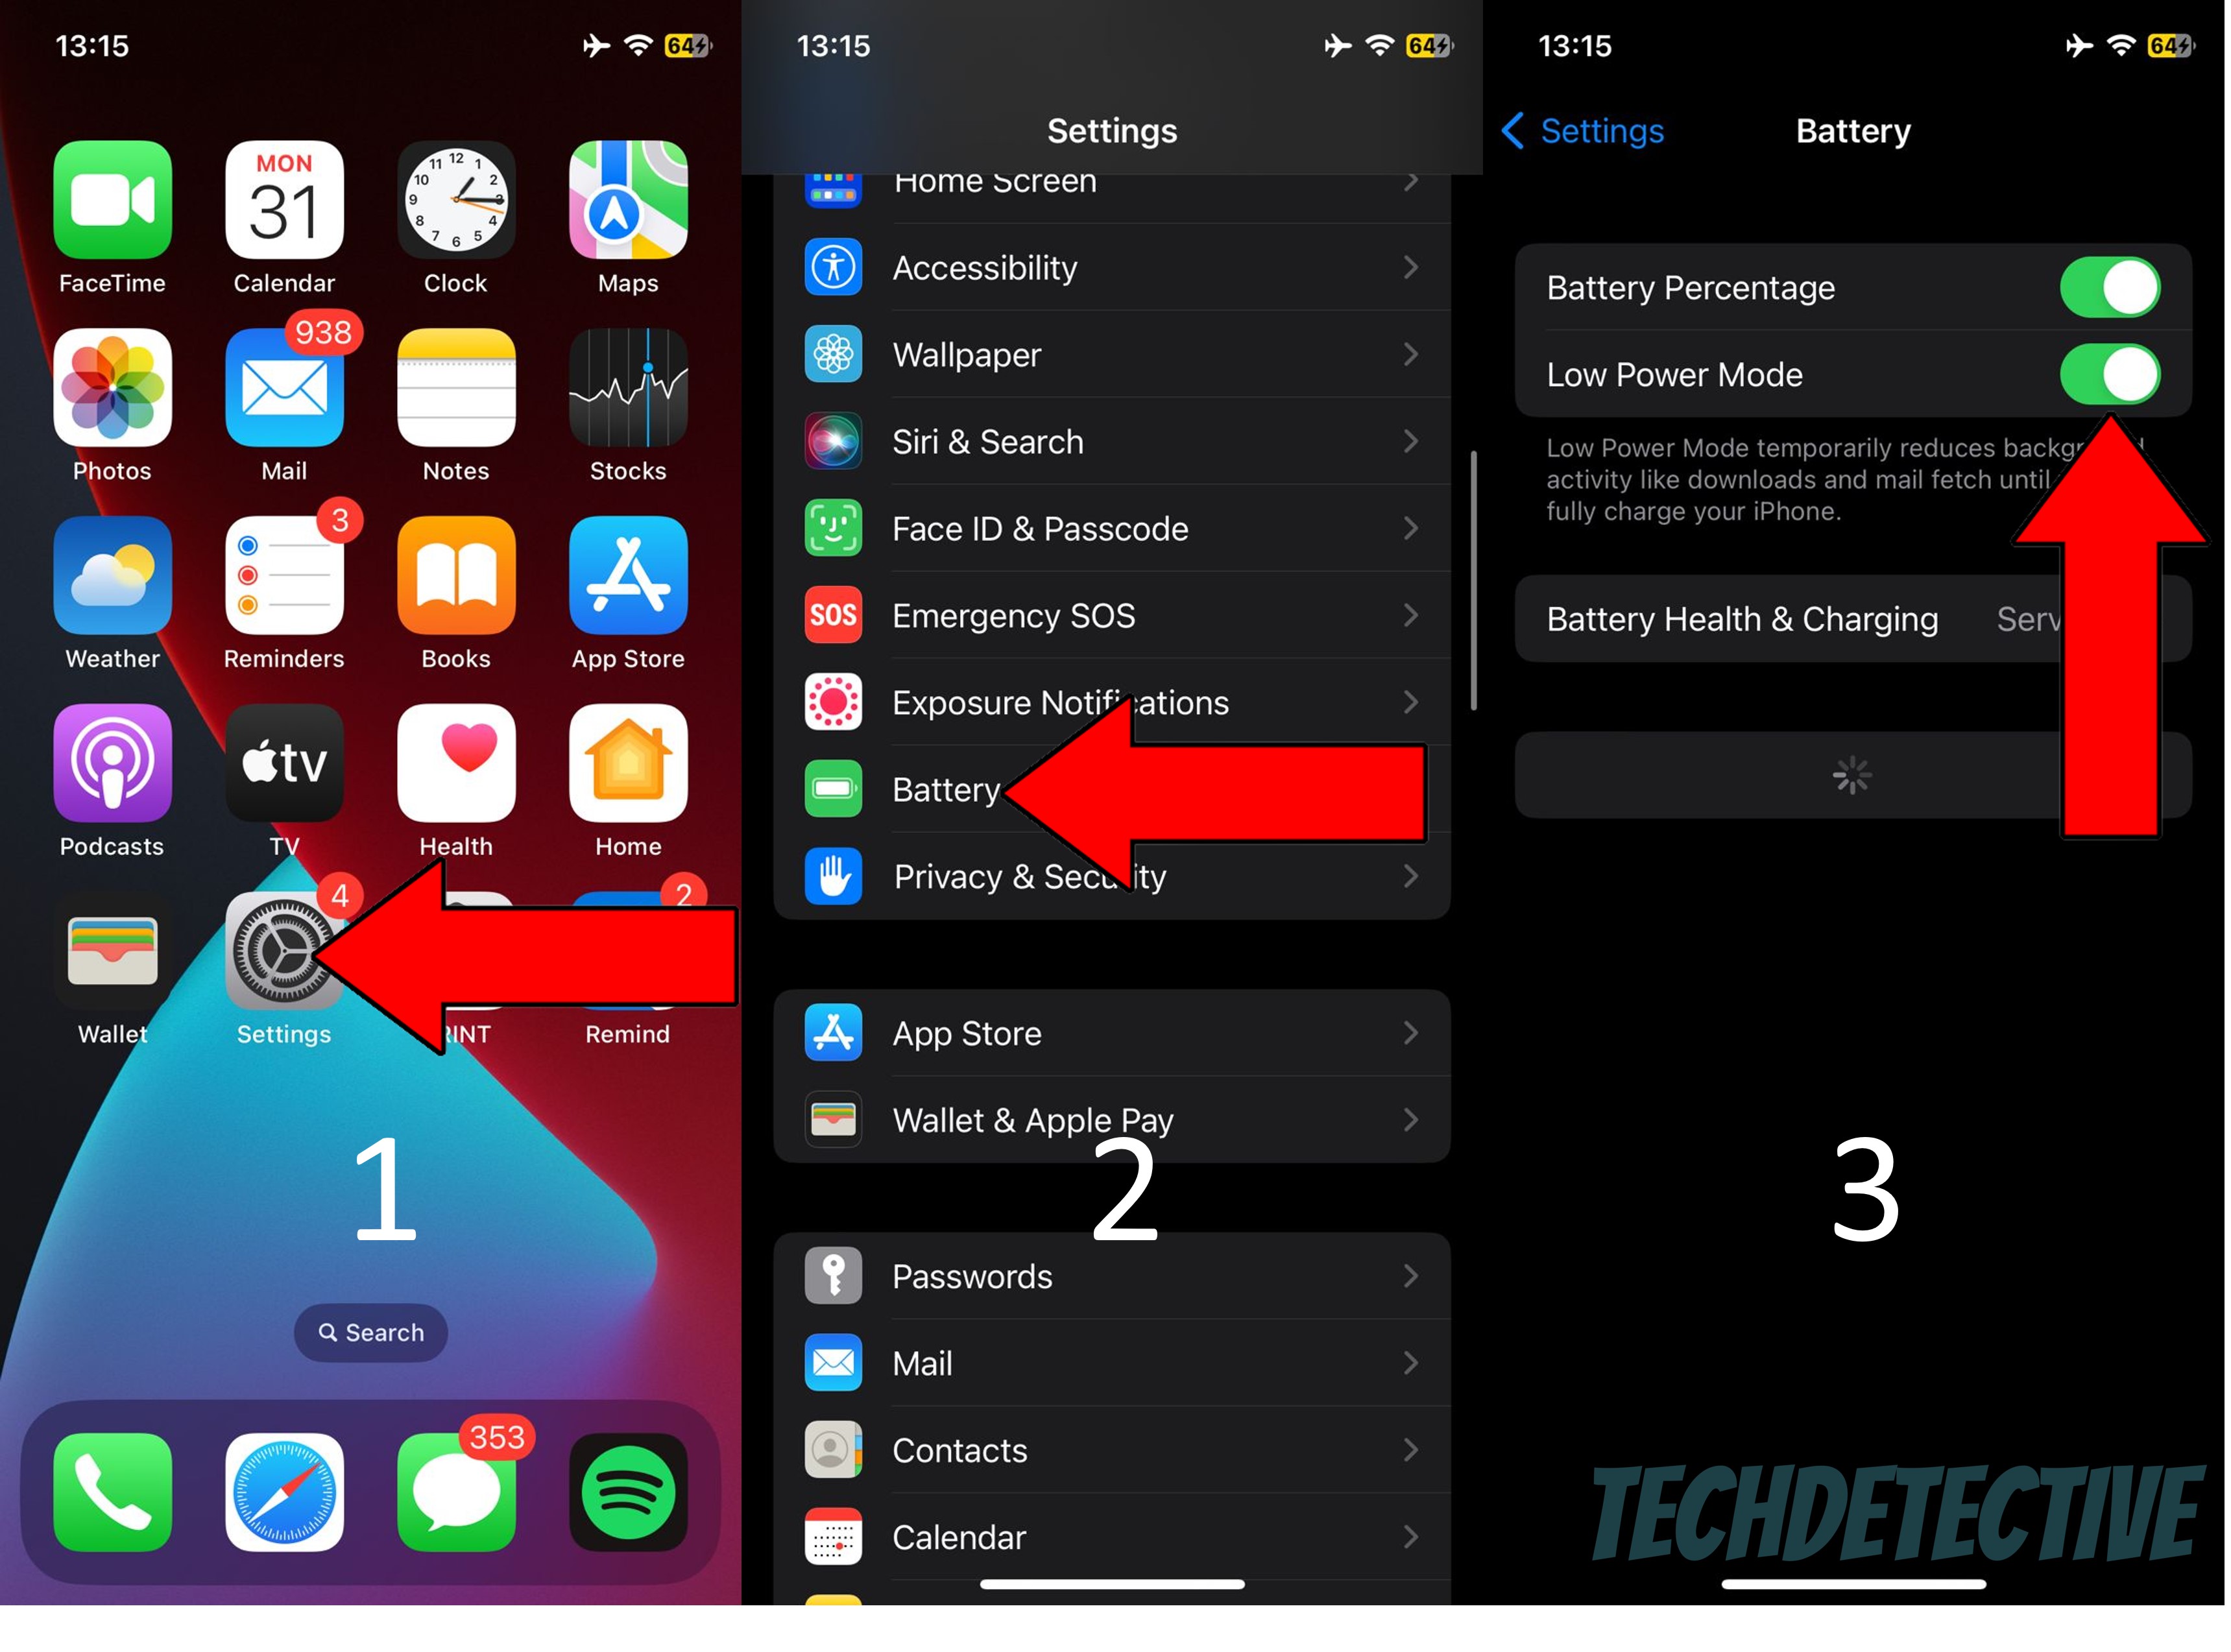 How to toggle off Low Power Mode on iPhone